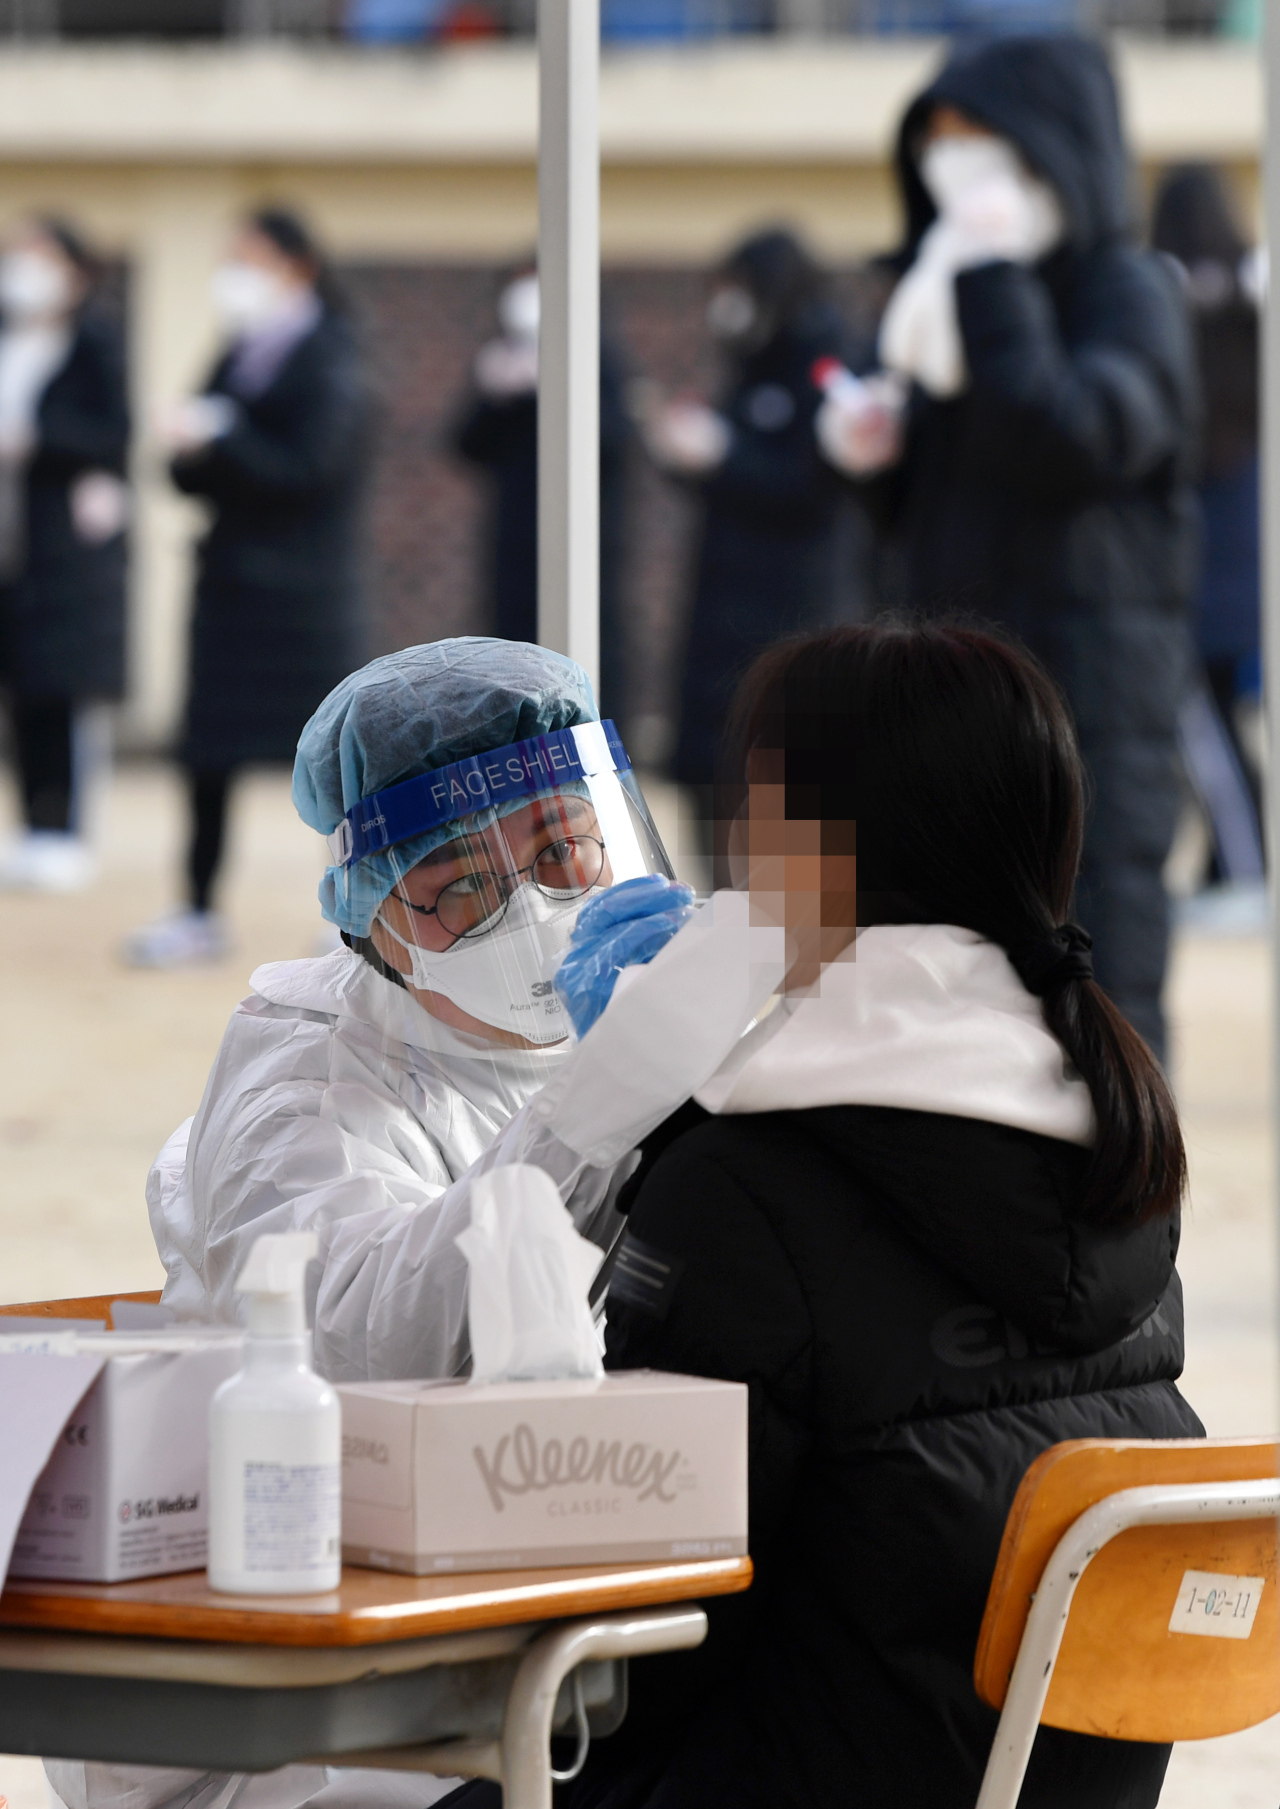 This file photo taken last Friday shows students receiving a COVID-19 test at a high school in the southwestern city of Gwangju. (Yonhap)